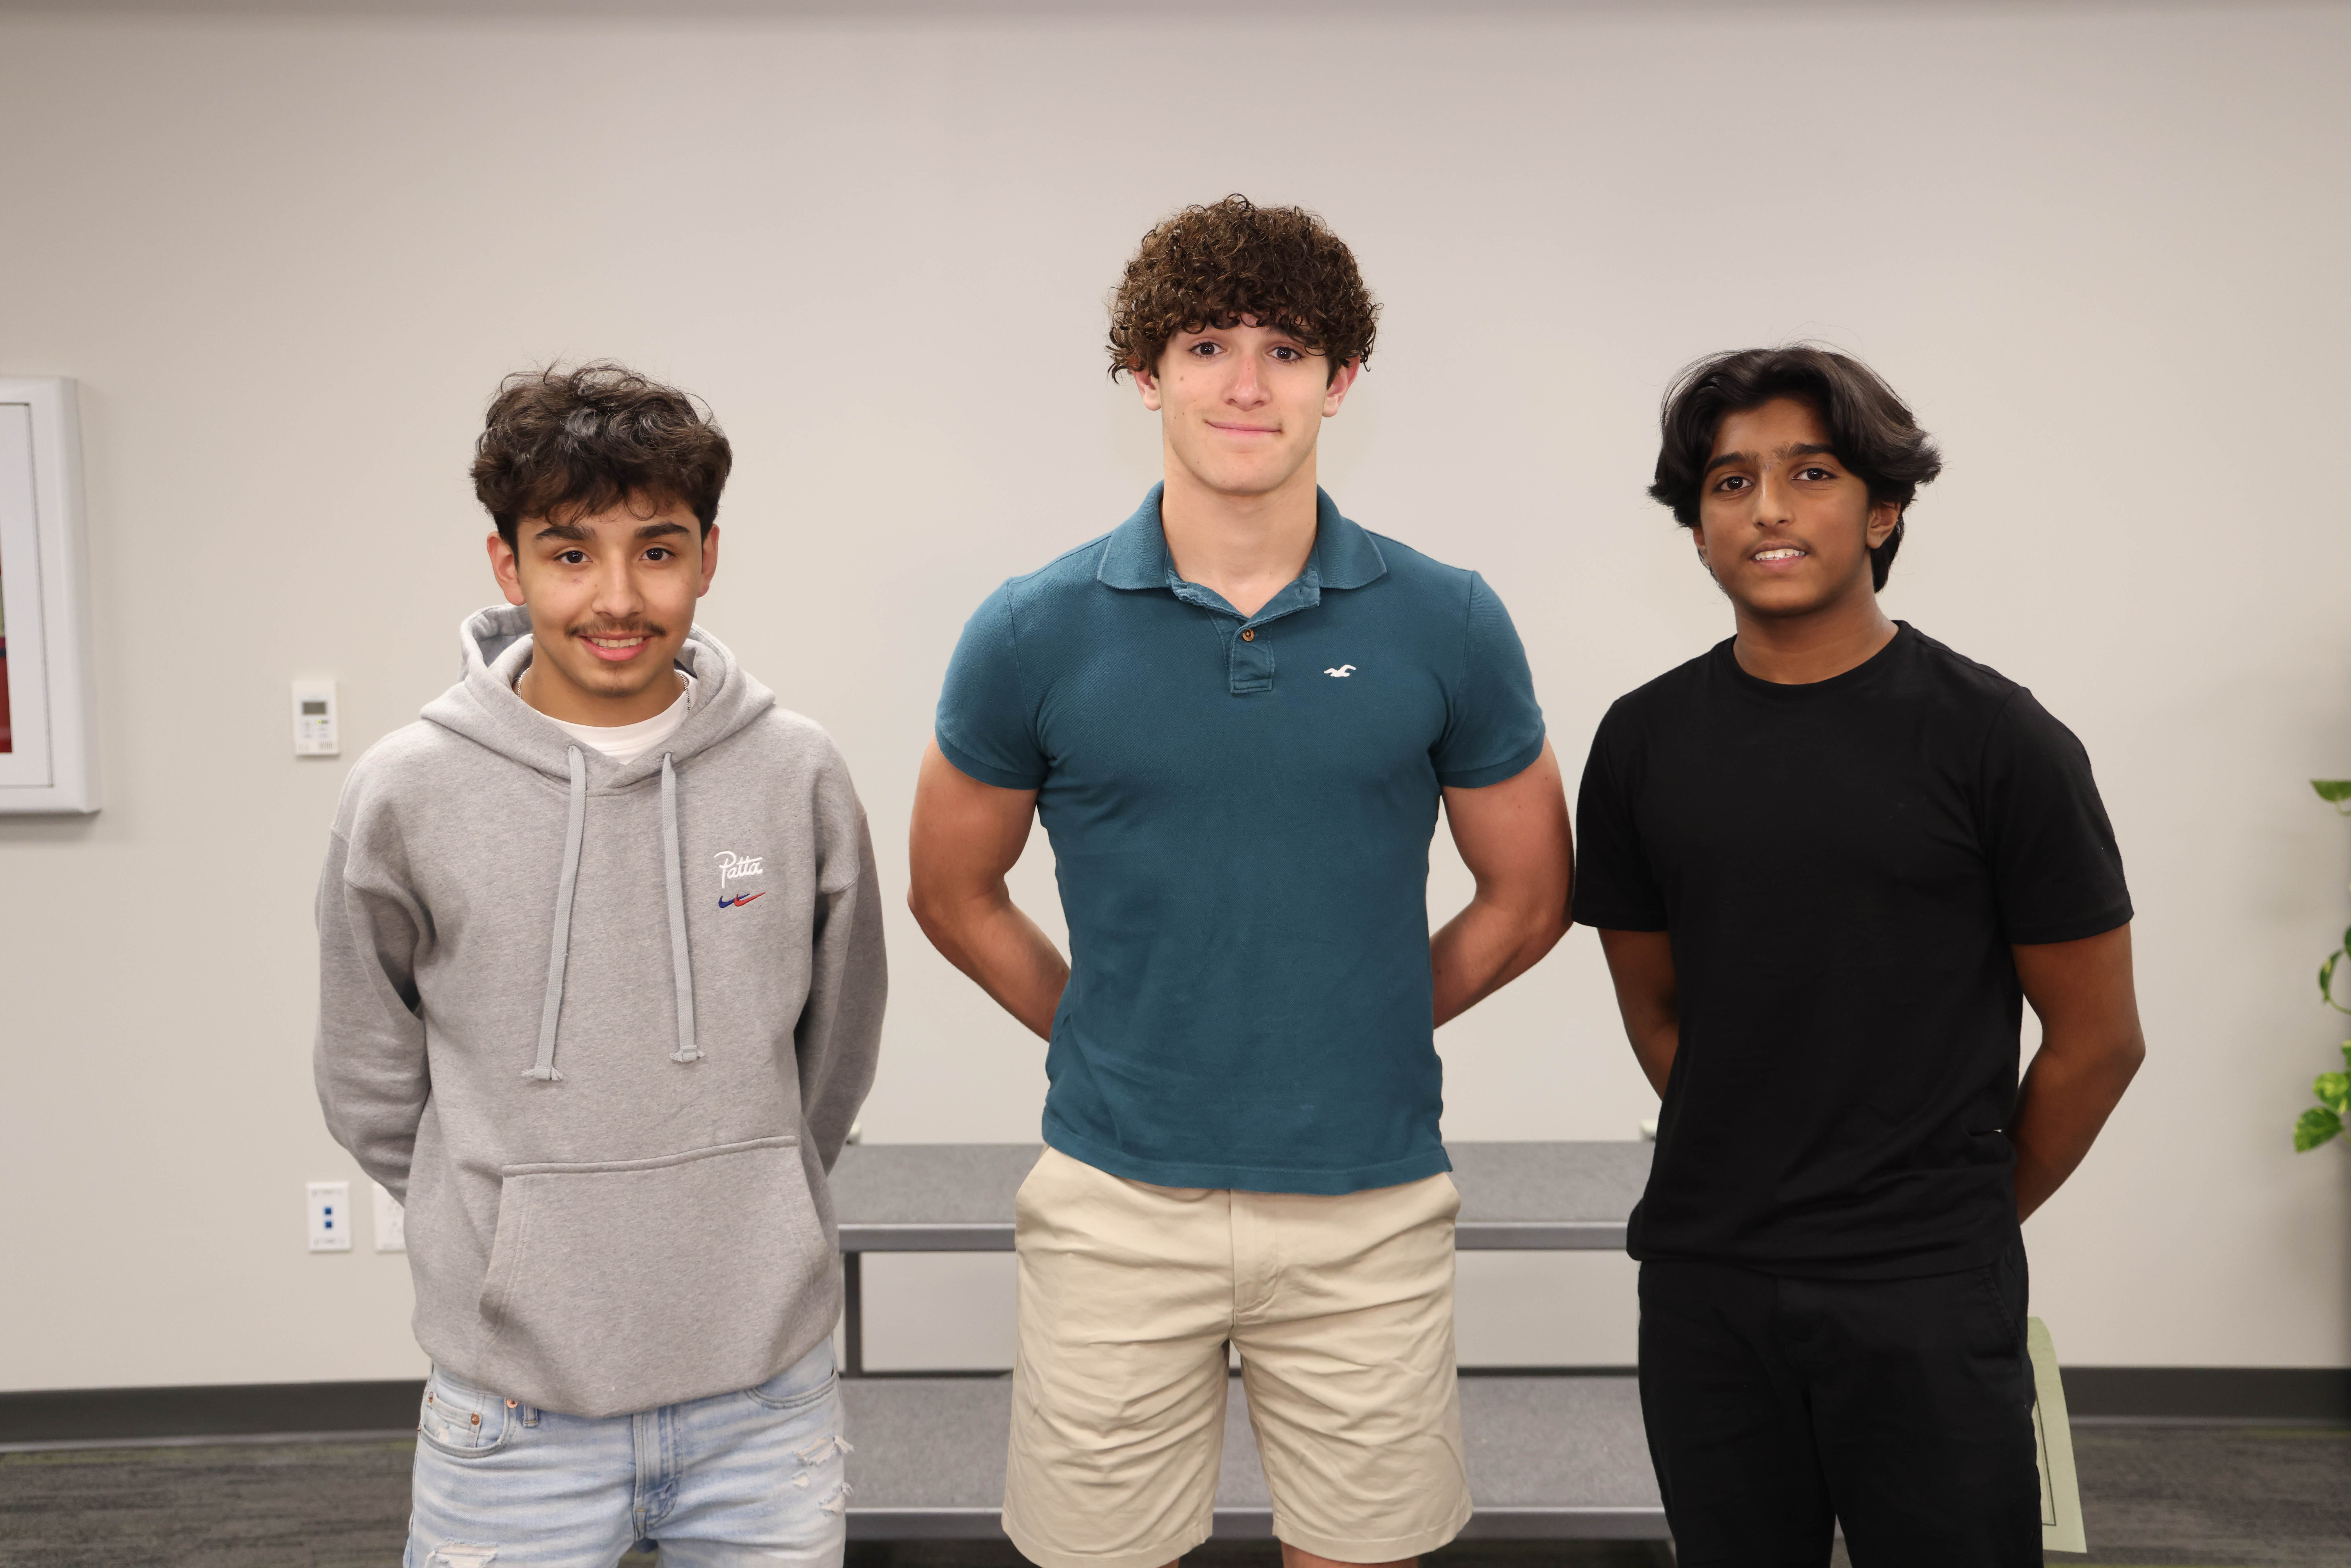 Three boys wrestling team members pose for a picture.